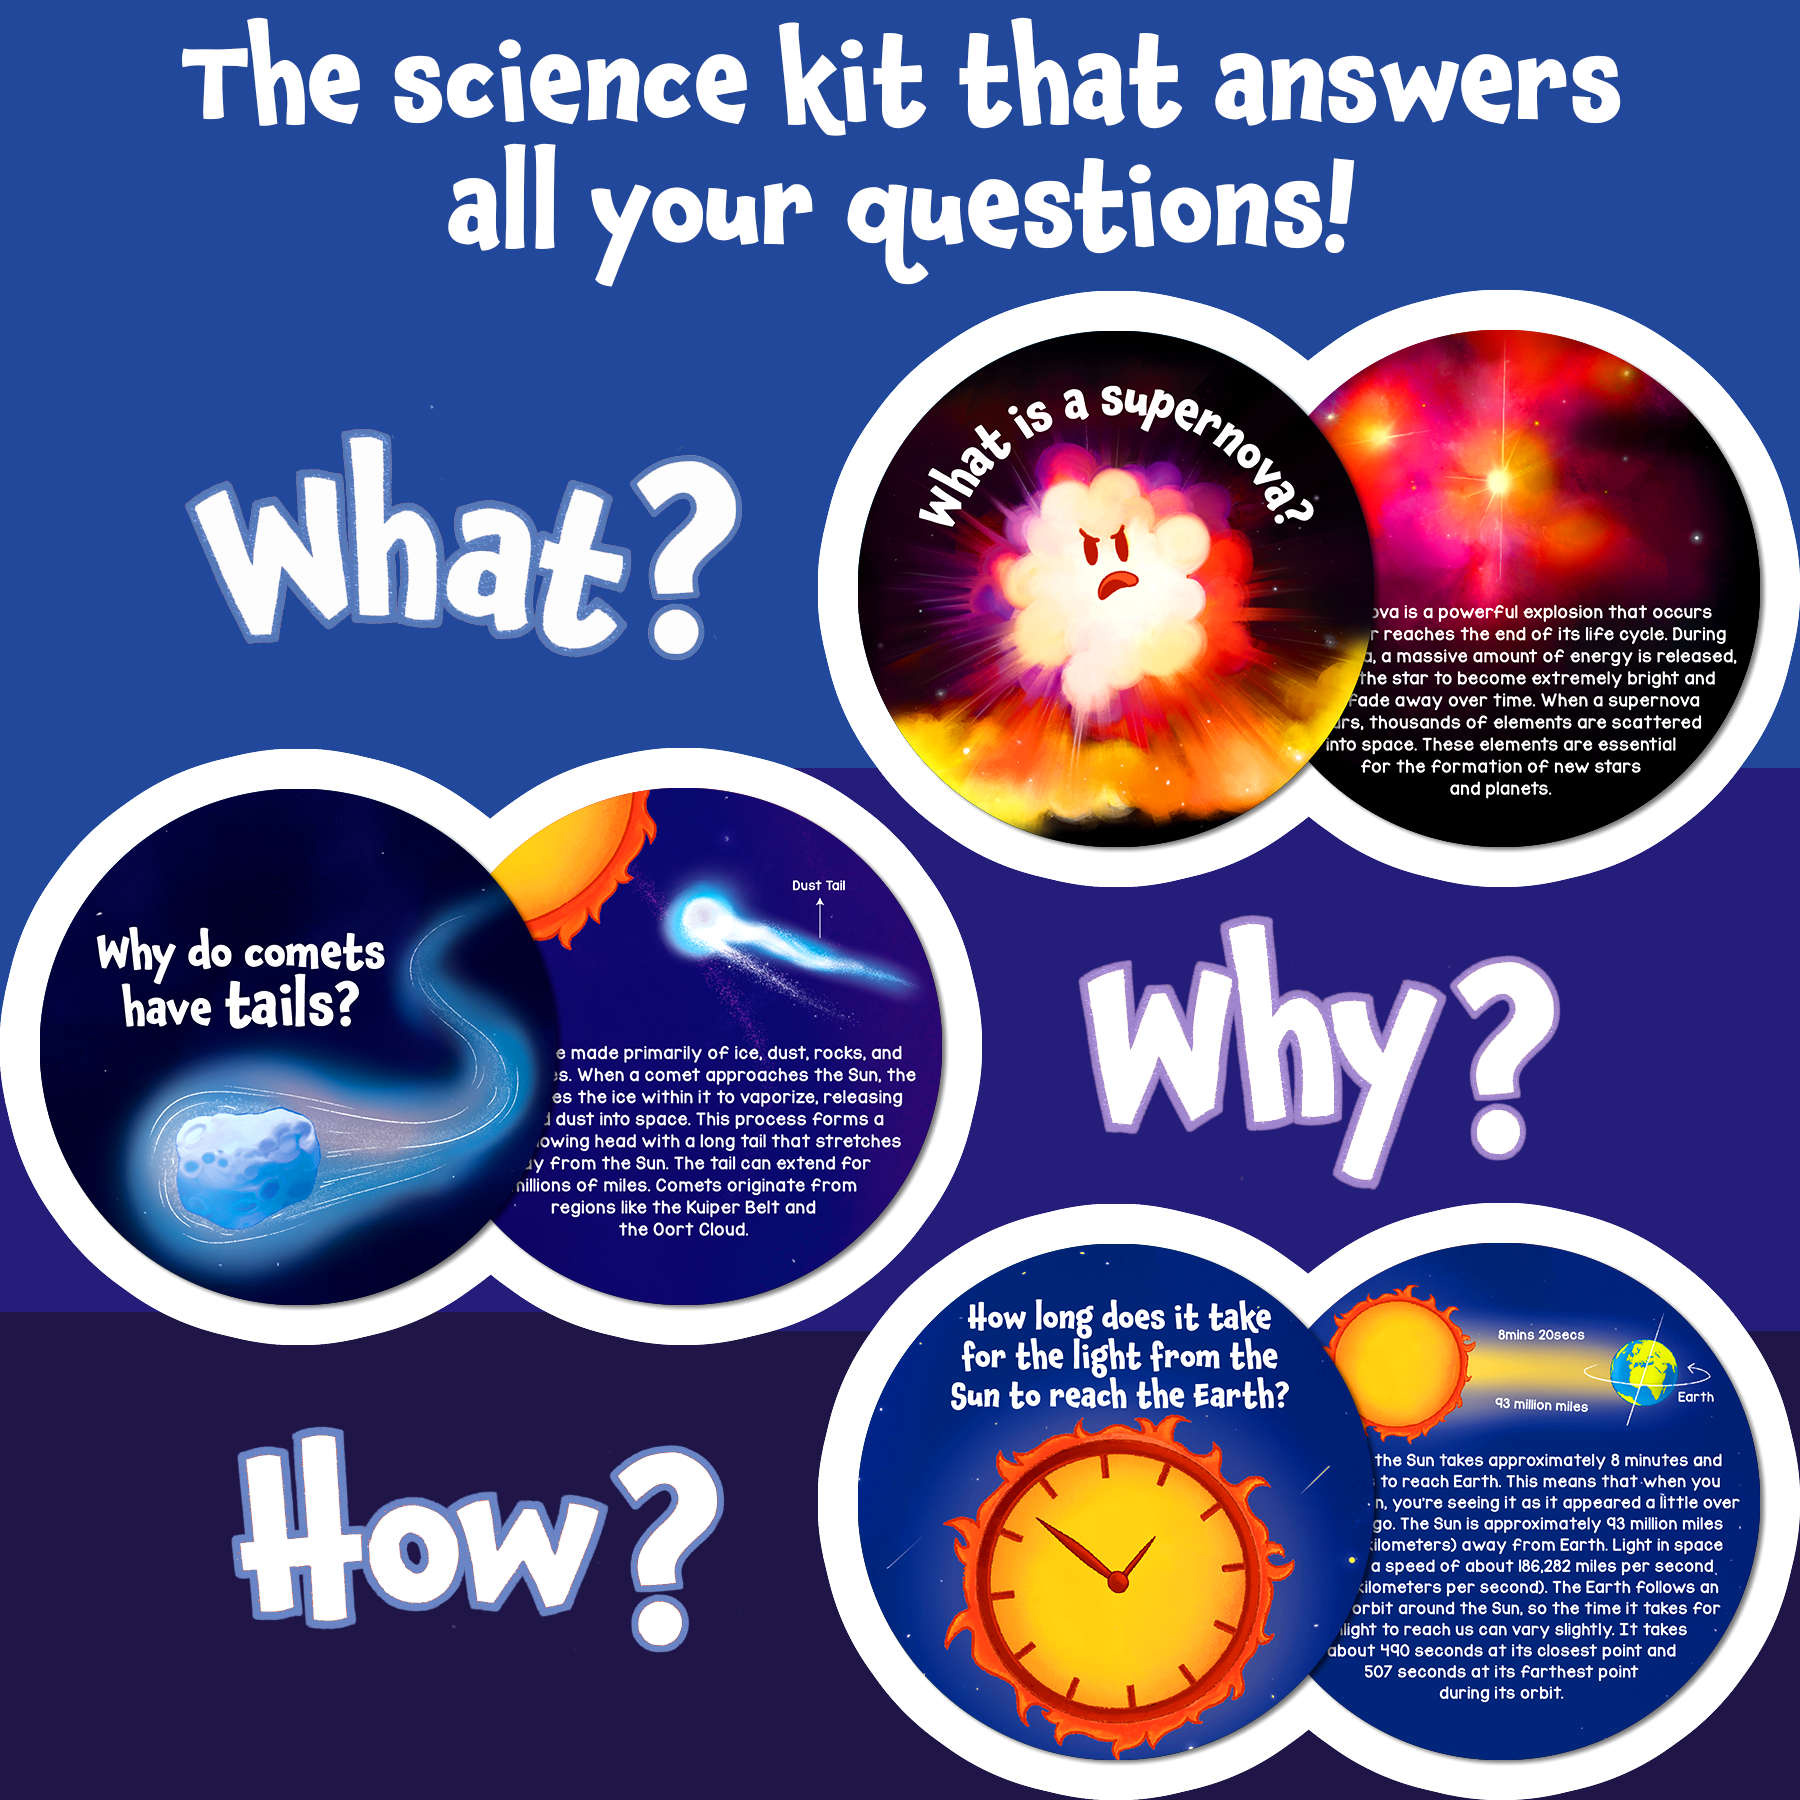 Skillmatics Science Snippets Space Kit - STEM Learning Resource & Educational Toys for Boys & Girls, 70+ Double-Sided Interactive Cards, Gifts for Ages 7, 8, 9 & Up